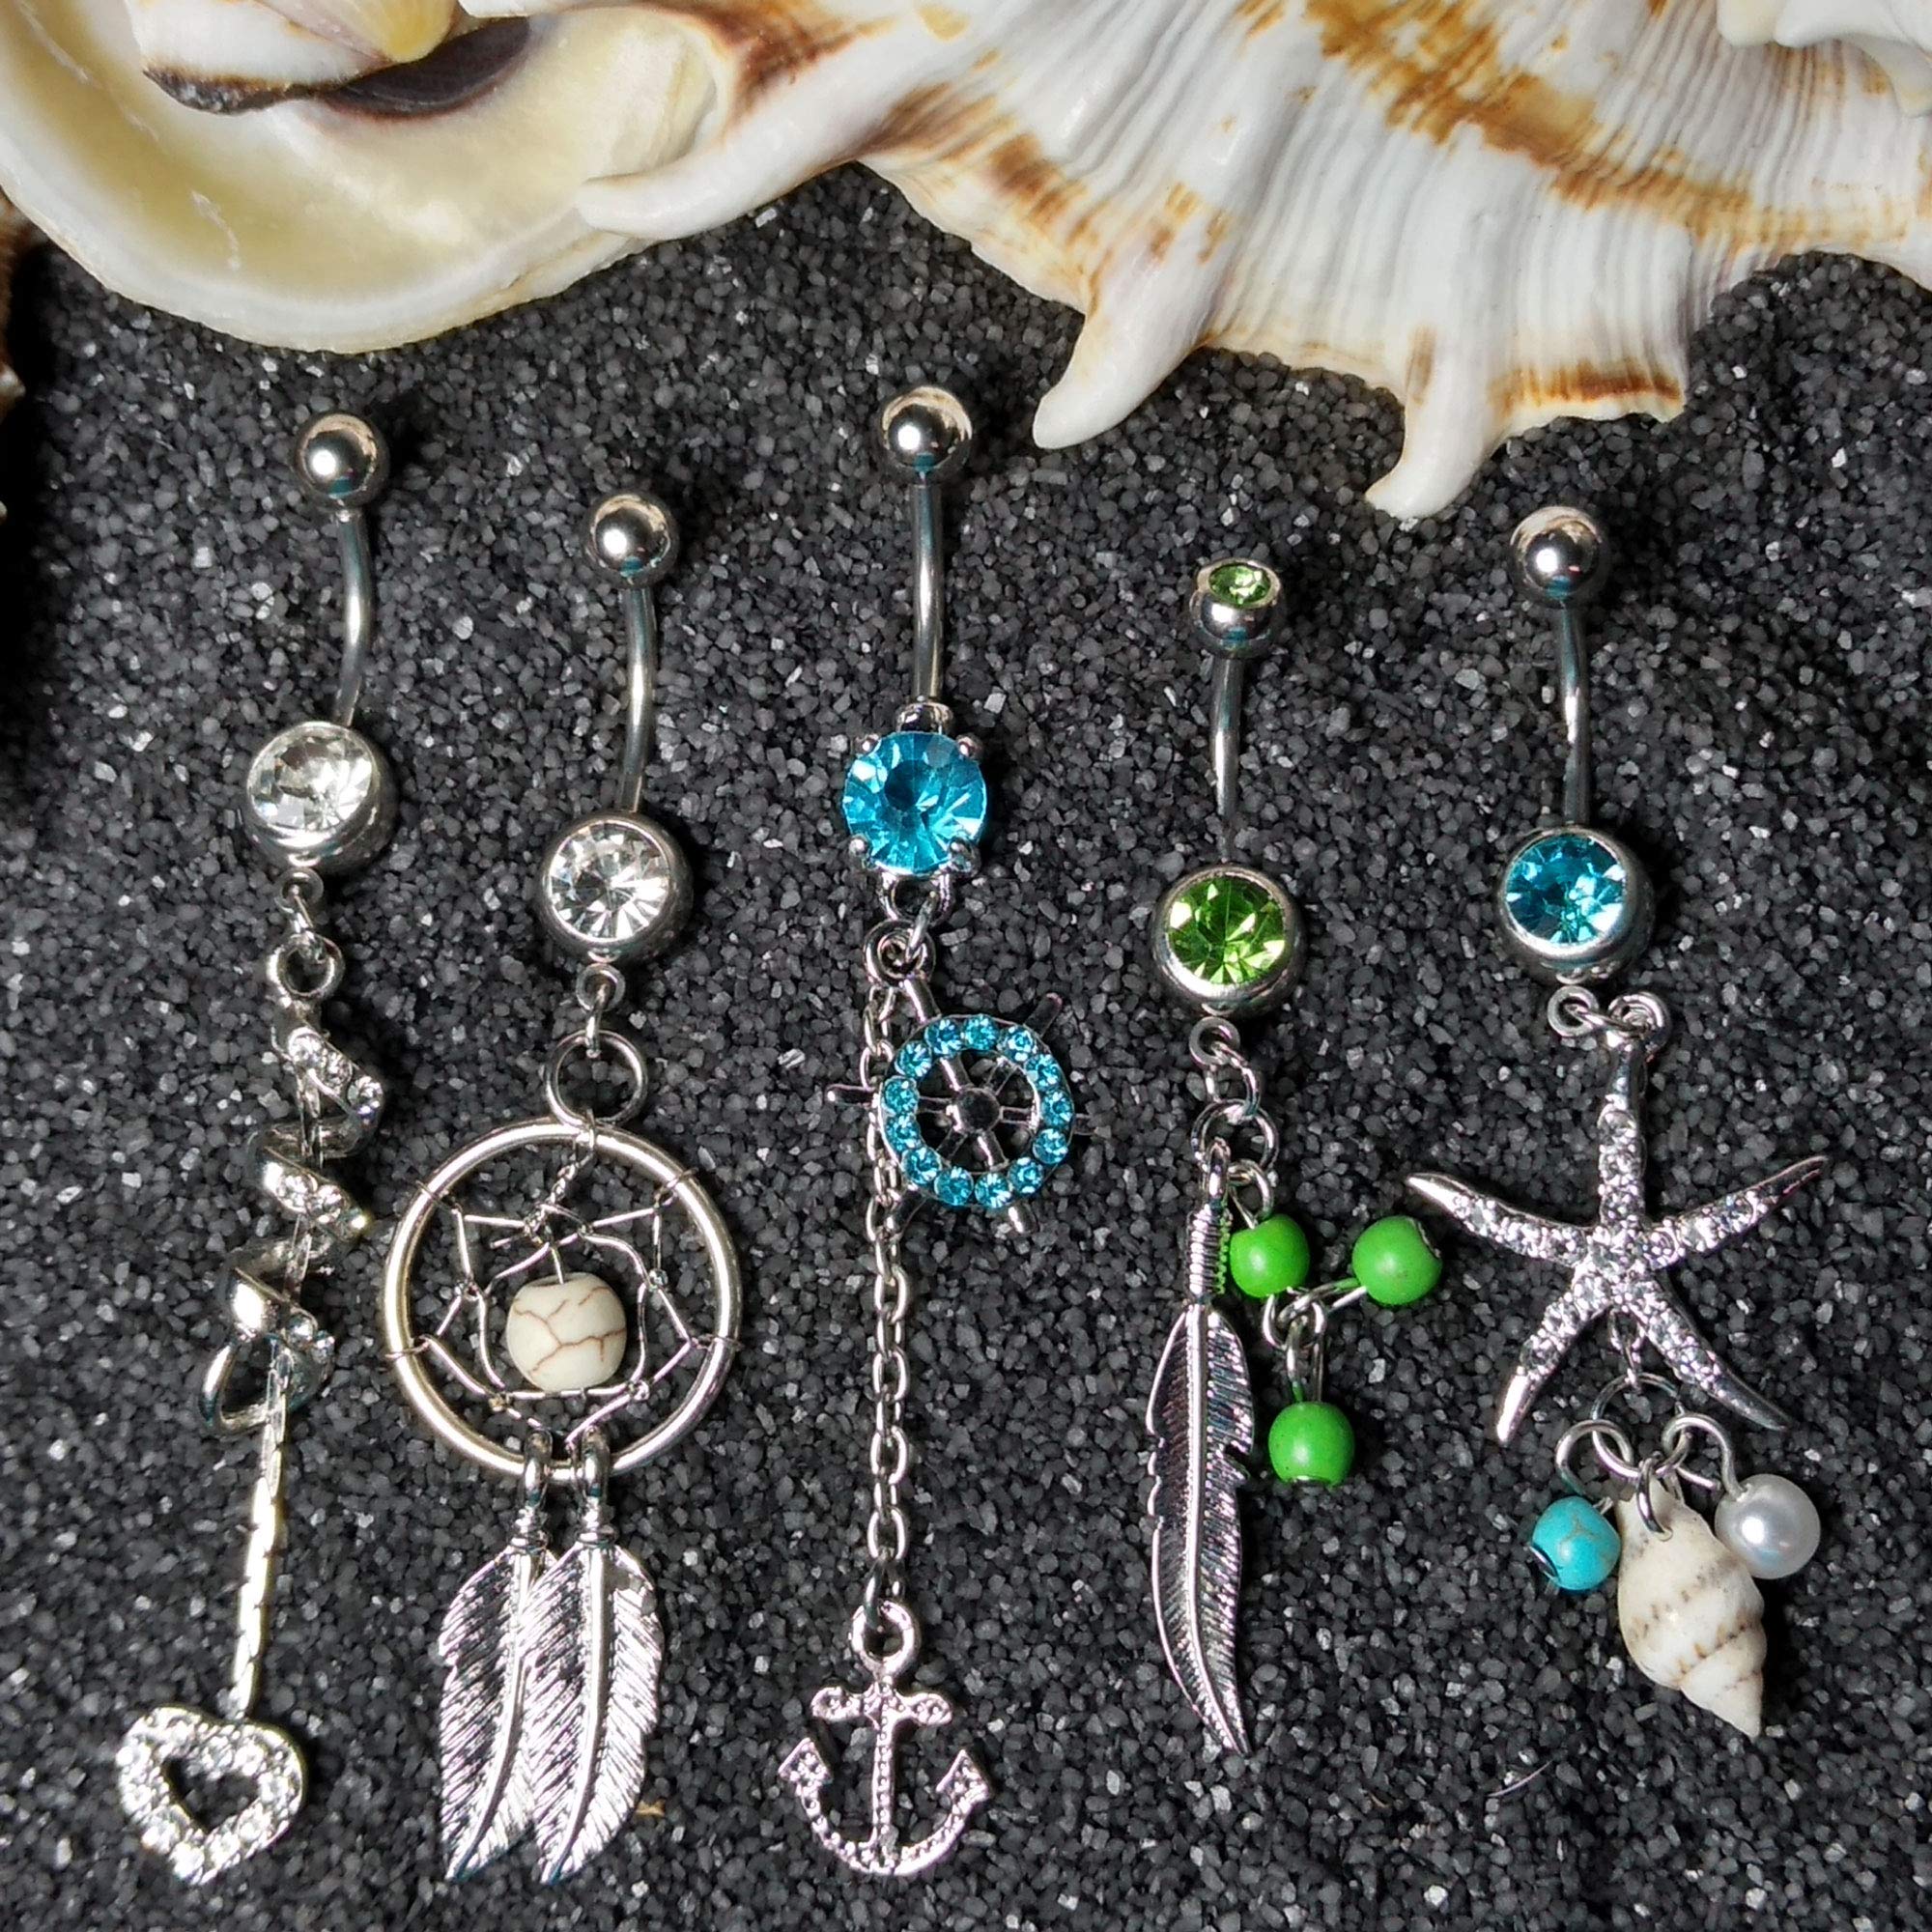 BodyJ4You Belly Button Rings Flower Seashell Nautical Anchor Curved Banana Bar 14G Dangle Stainless Steel Barbell CZ Multicolor Crystal Girl Women Teen Gift Jewelry